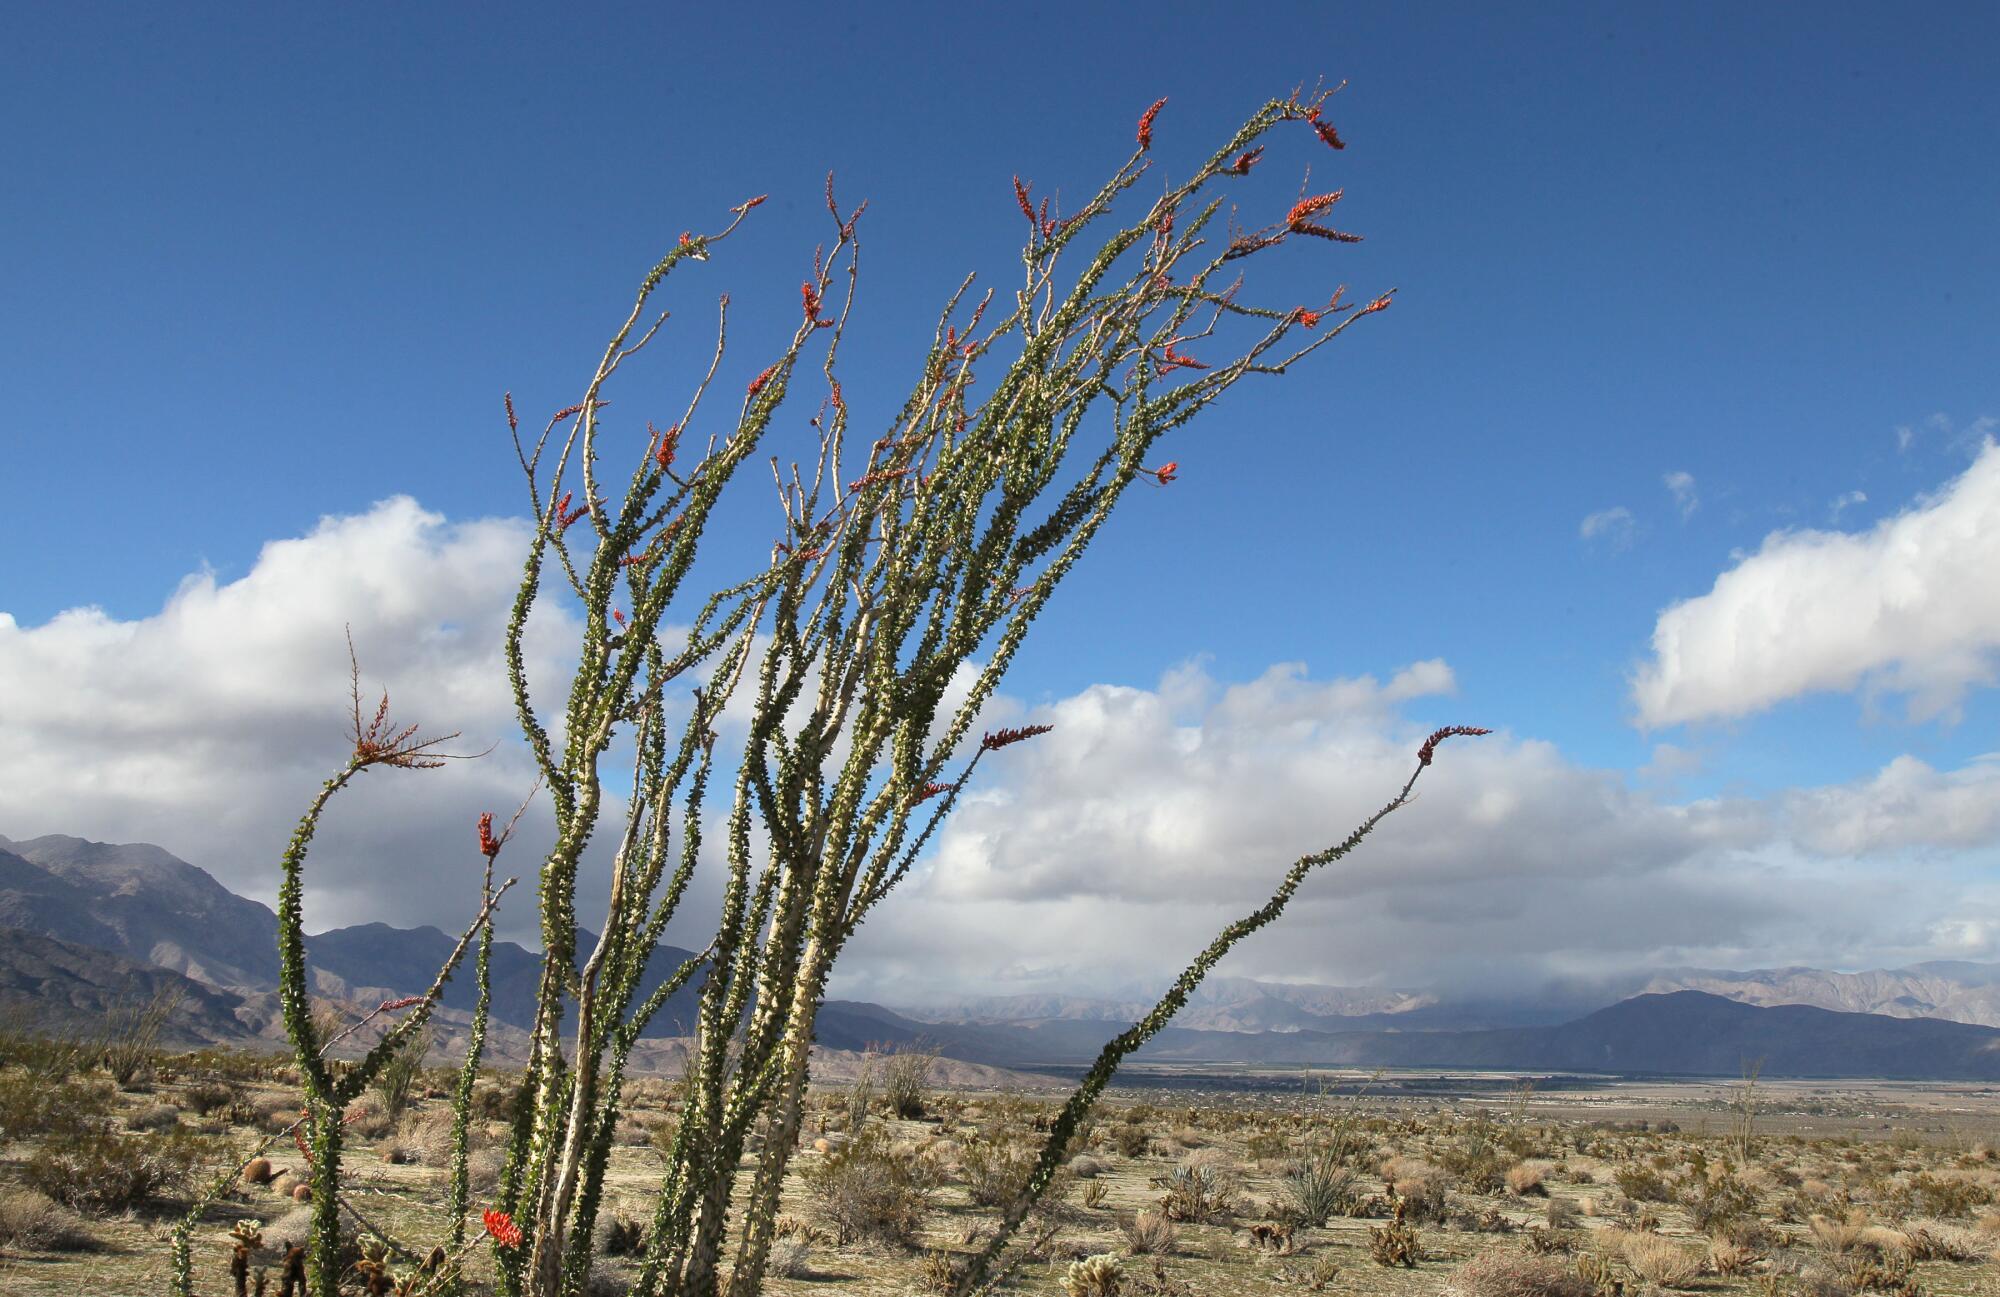 An Ocotillo plant with some red flowers